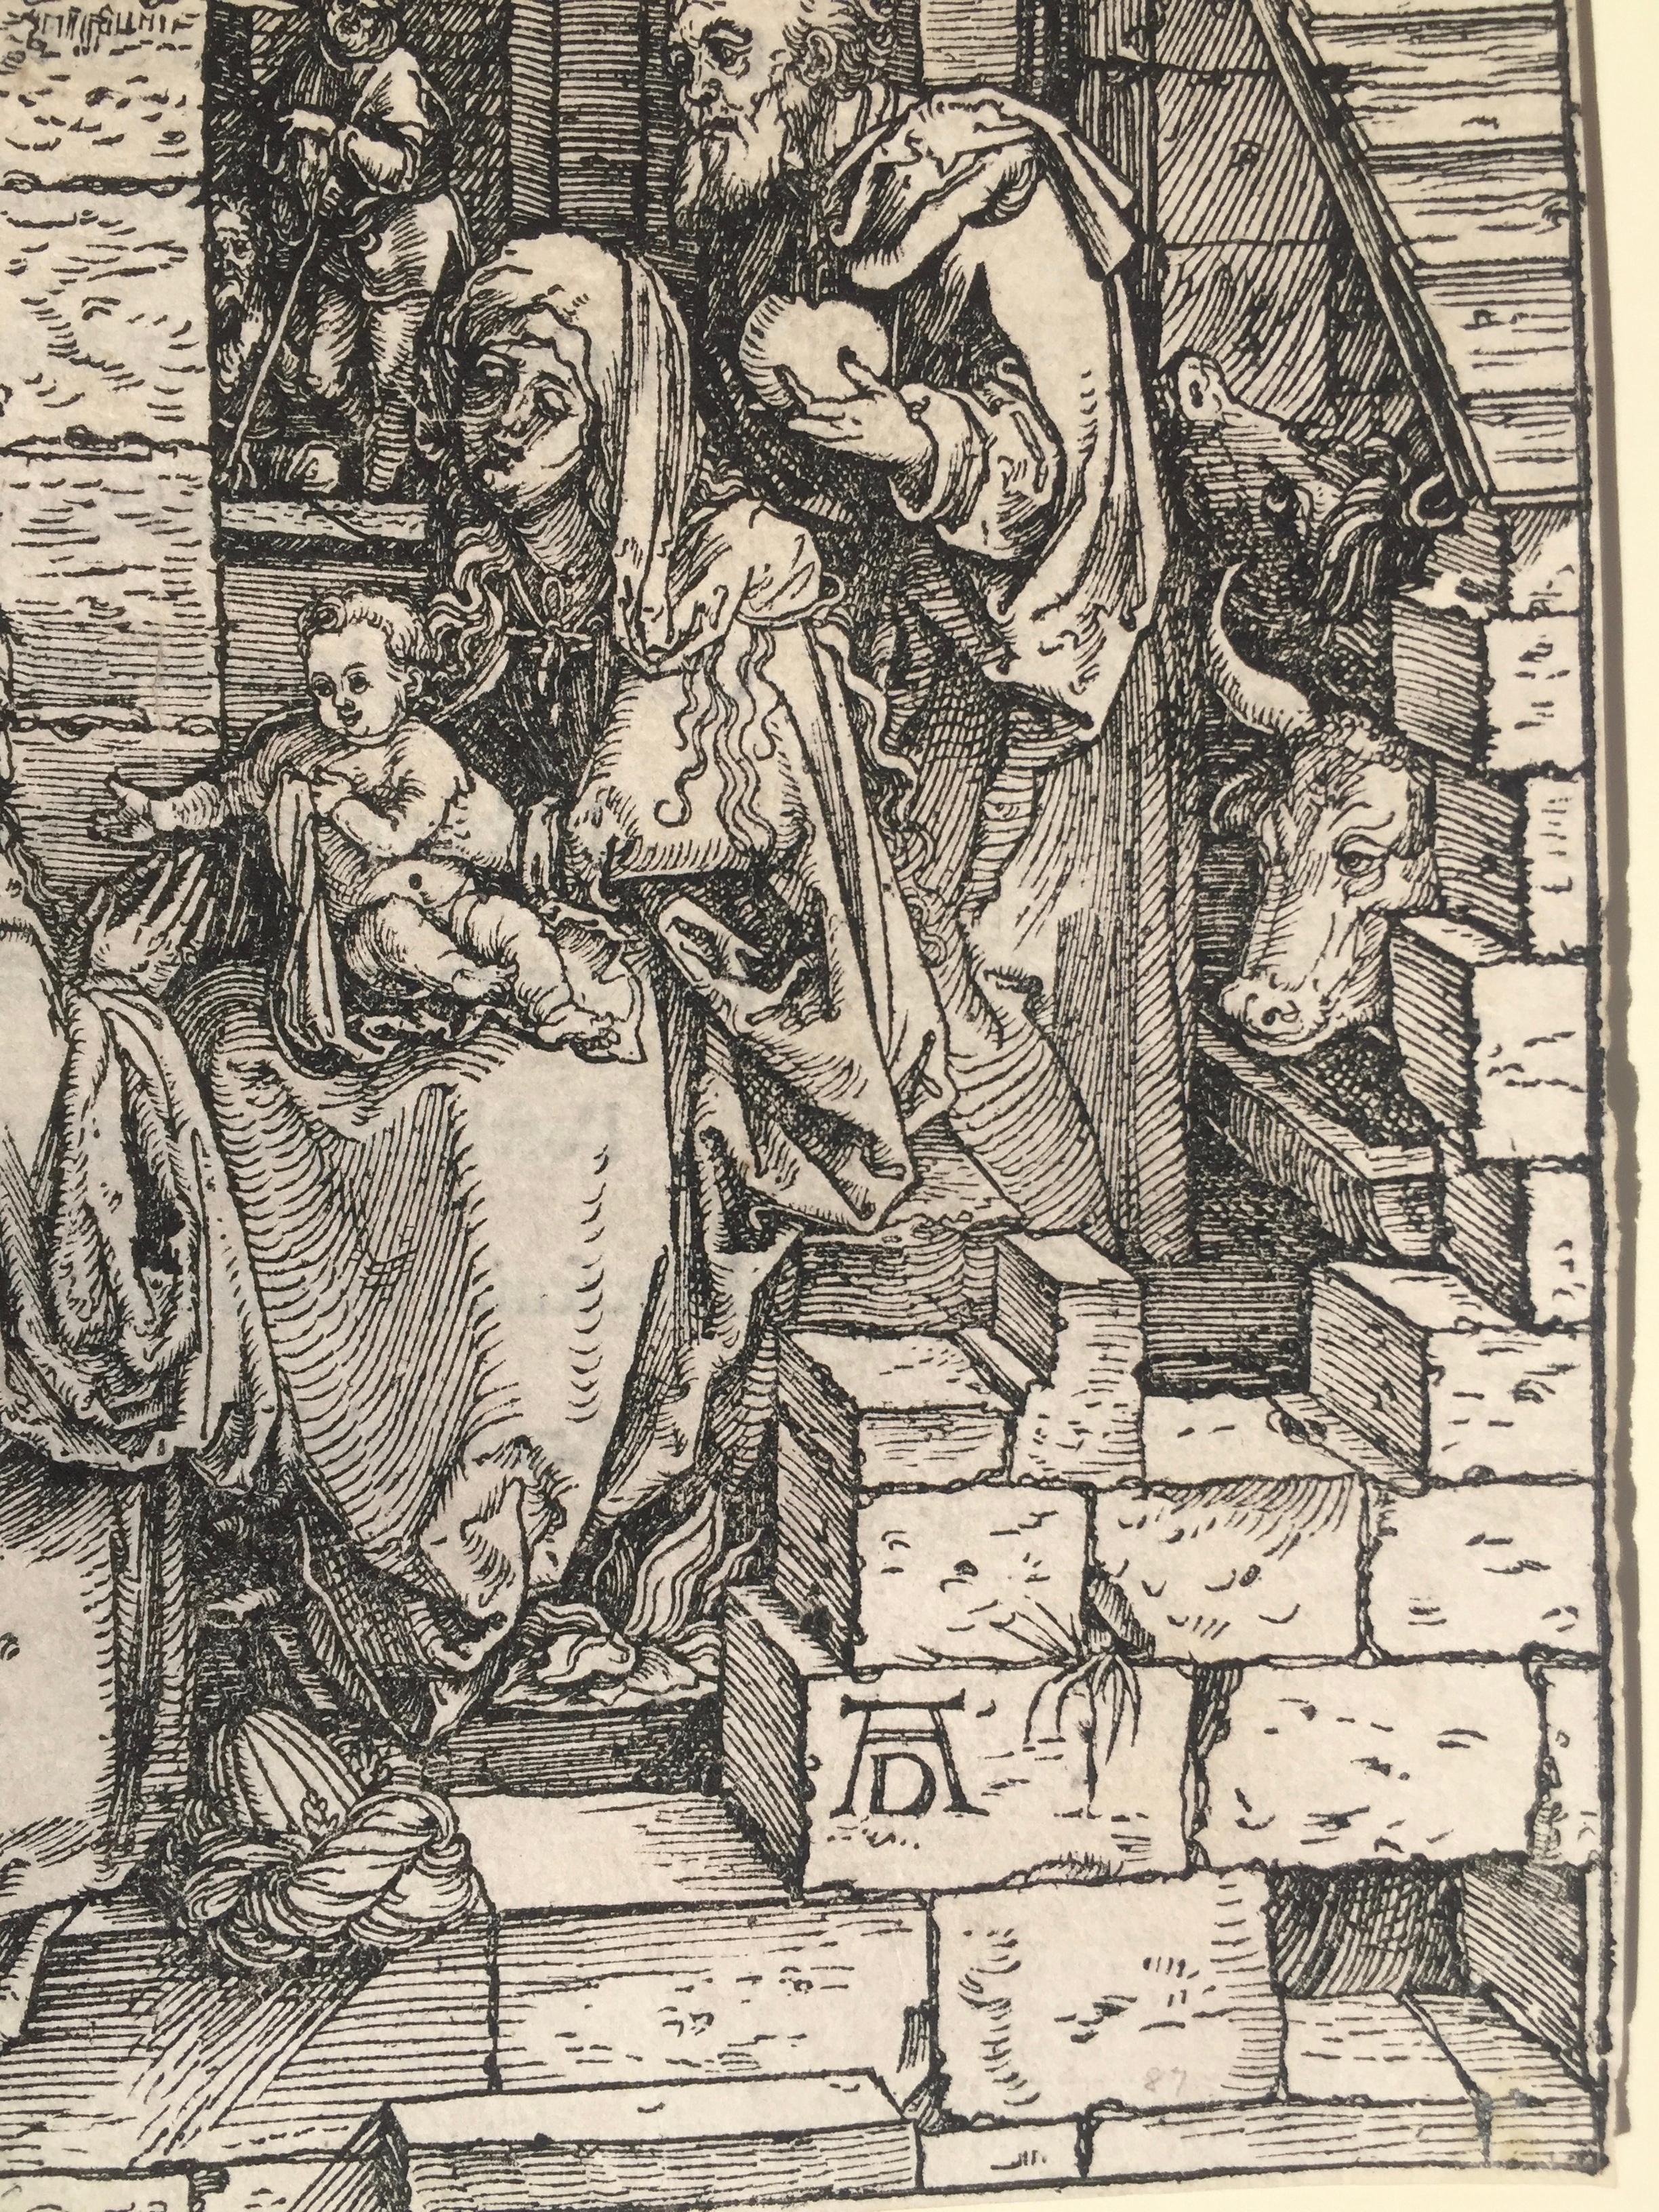 THE ADORATION OF THE MAGI - from Life of the Virgin (see also posted M Raimondi) - Old Masters Print by Albrecht Dürer